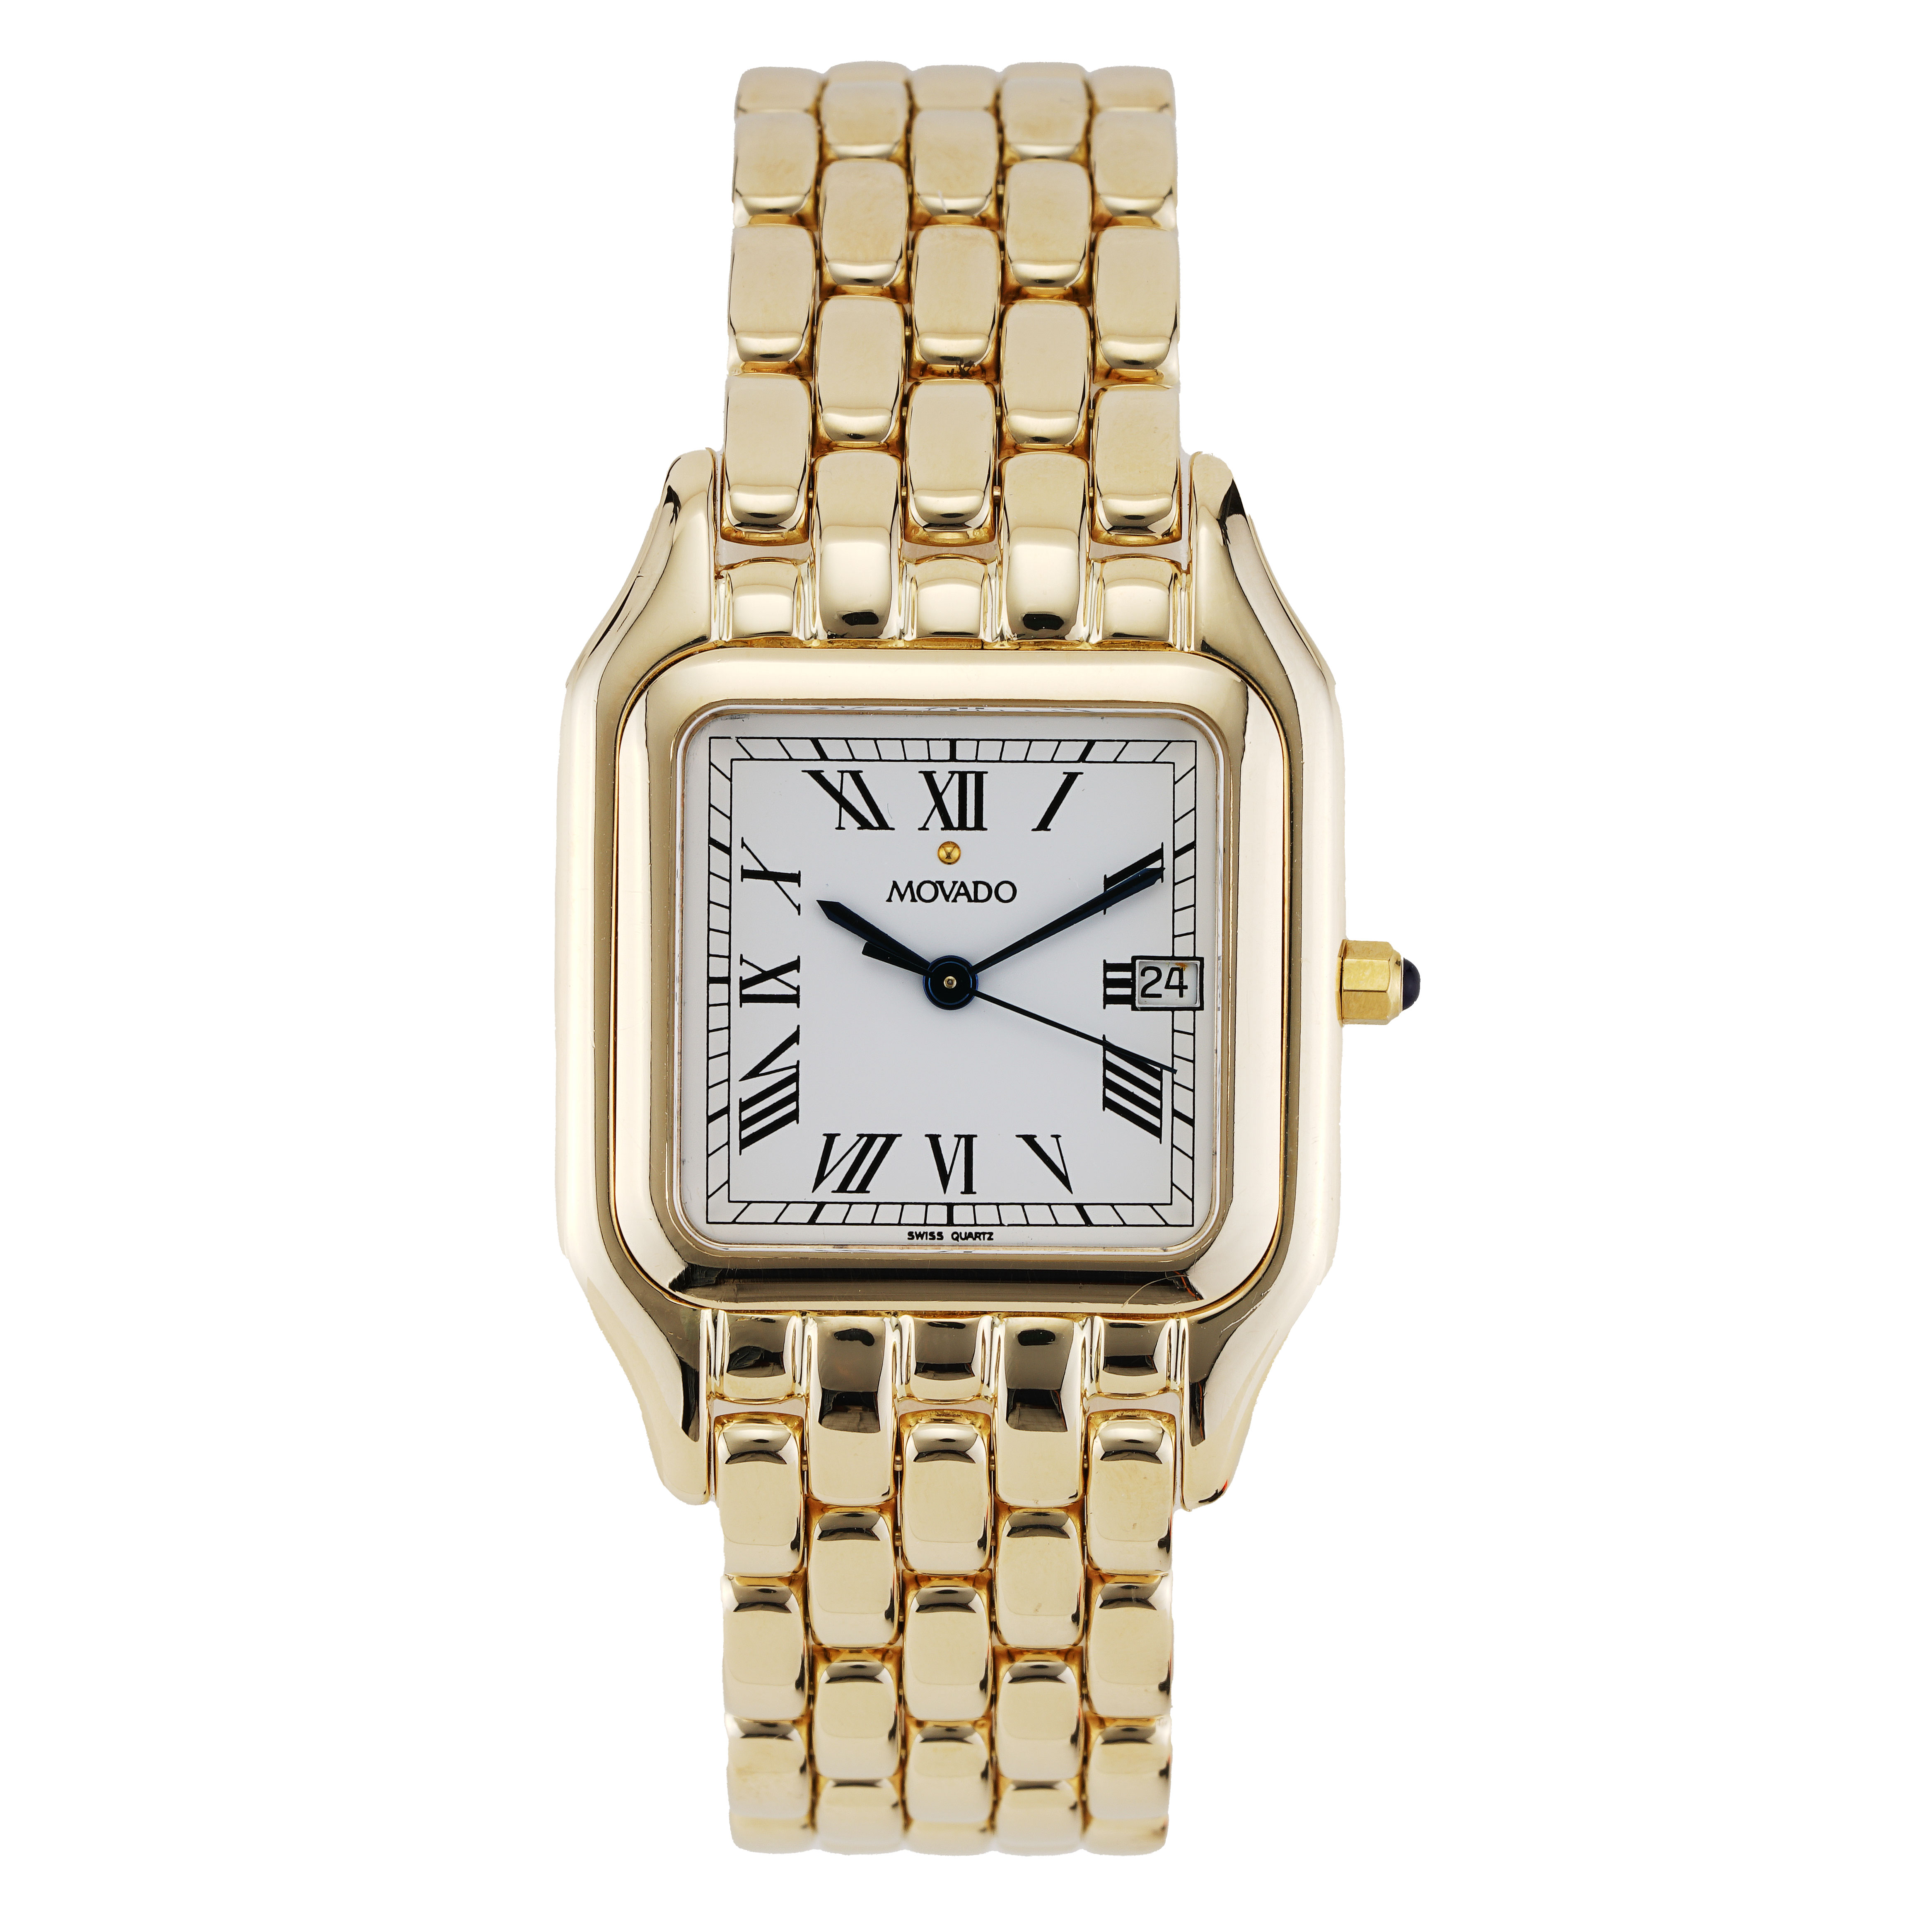 Movado Women's Watch Square Face | peacecommission.kdsg.gov.ng